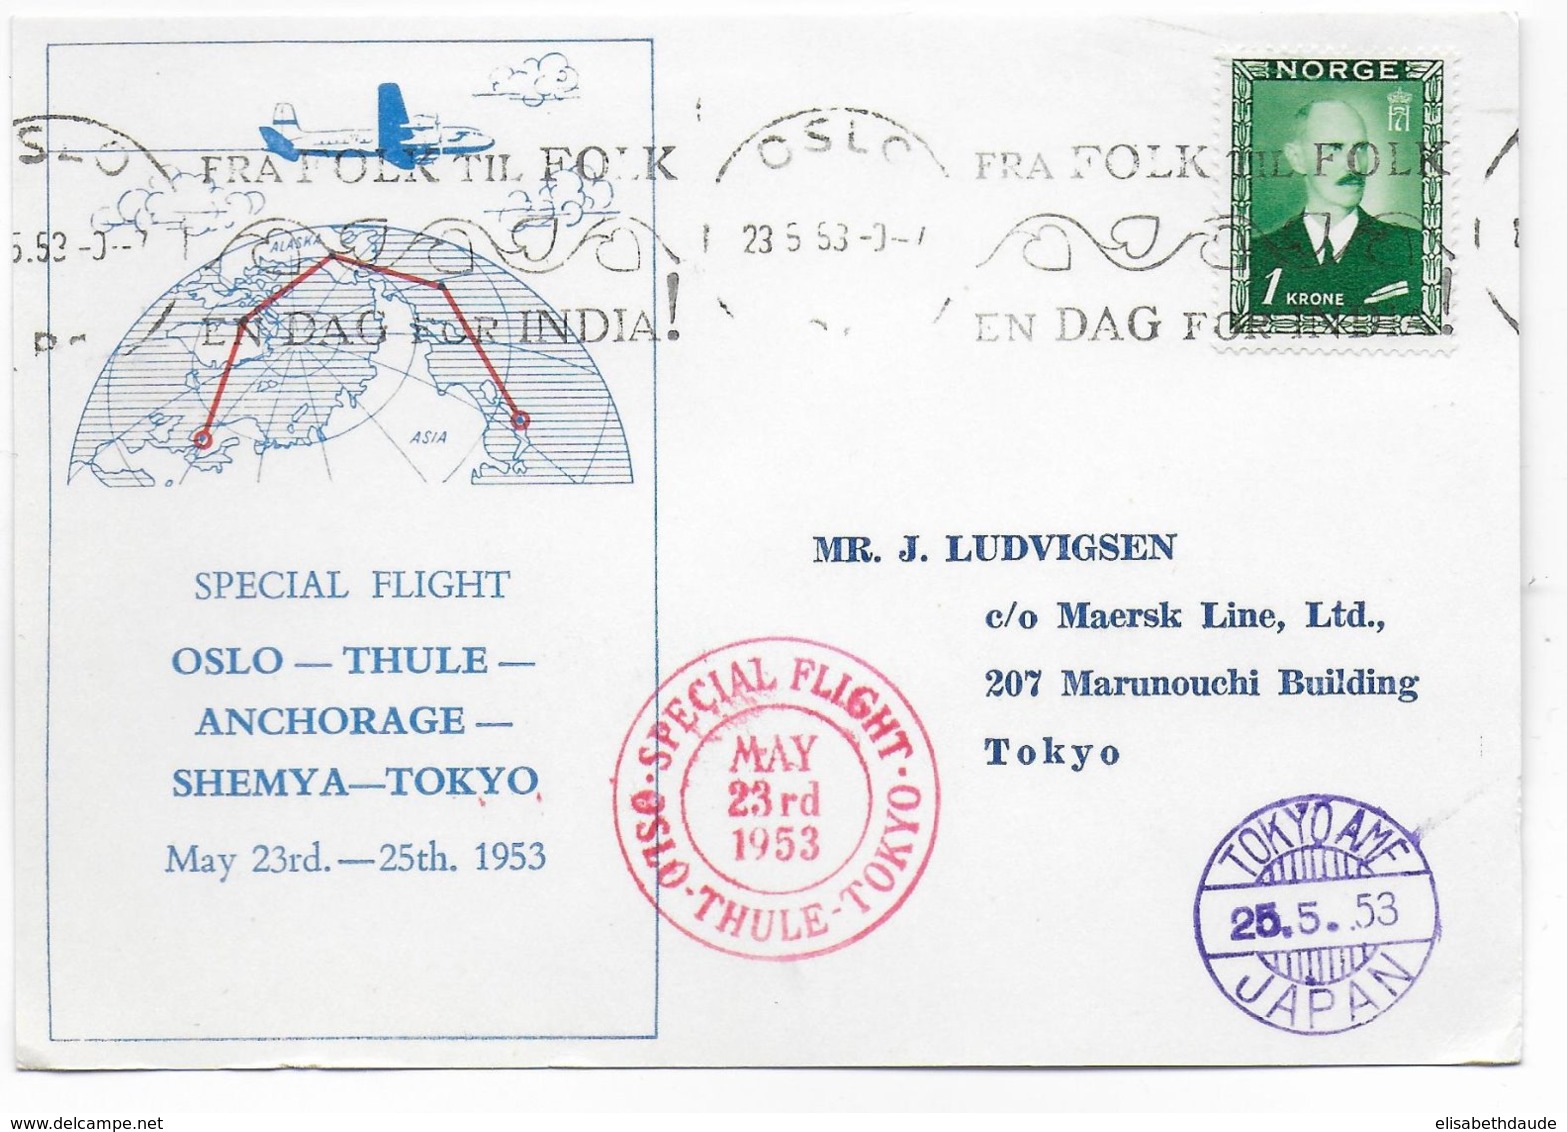 NORVEGE - 1953 - CARTE SPECIAL FLIGHT - VOL SPECIAL OSLO - THULE - ANCHORAGE - SHEMYA - TOKYO (JAPAN) - Lettres & Documents